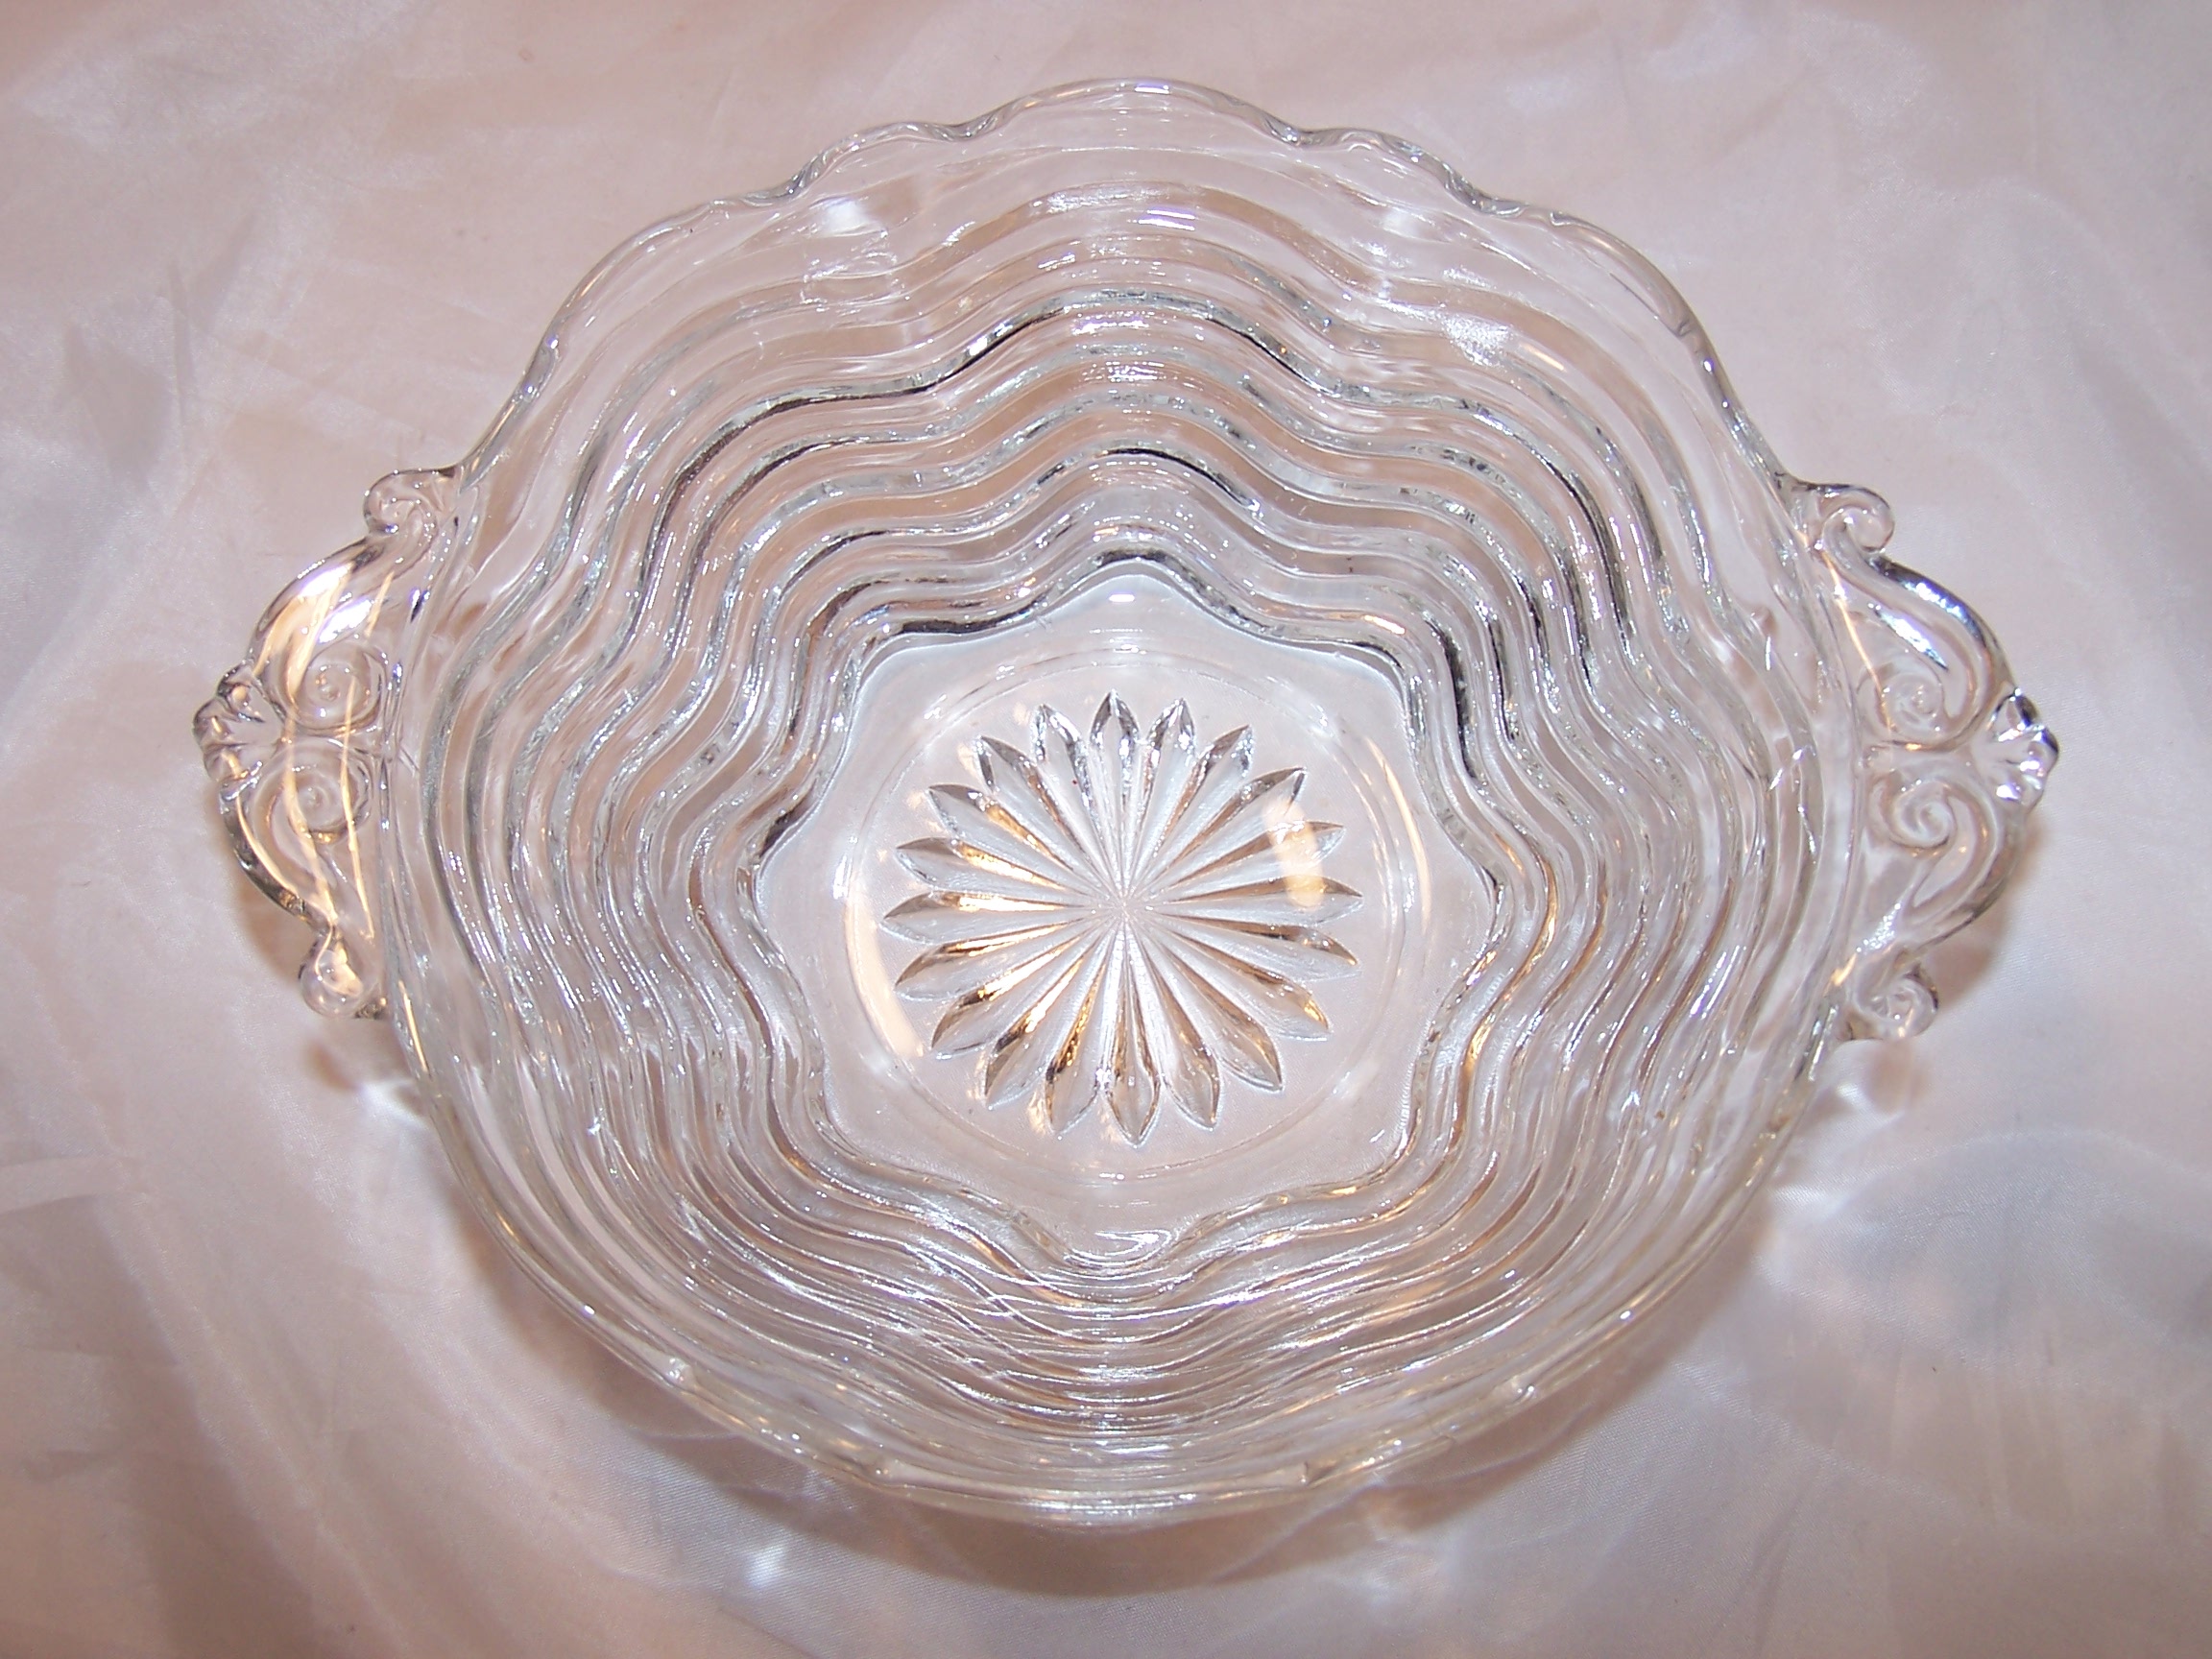 Duncan and Miller, Caribbean Pattern, Clear Glass Bowl w Handles